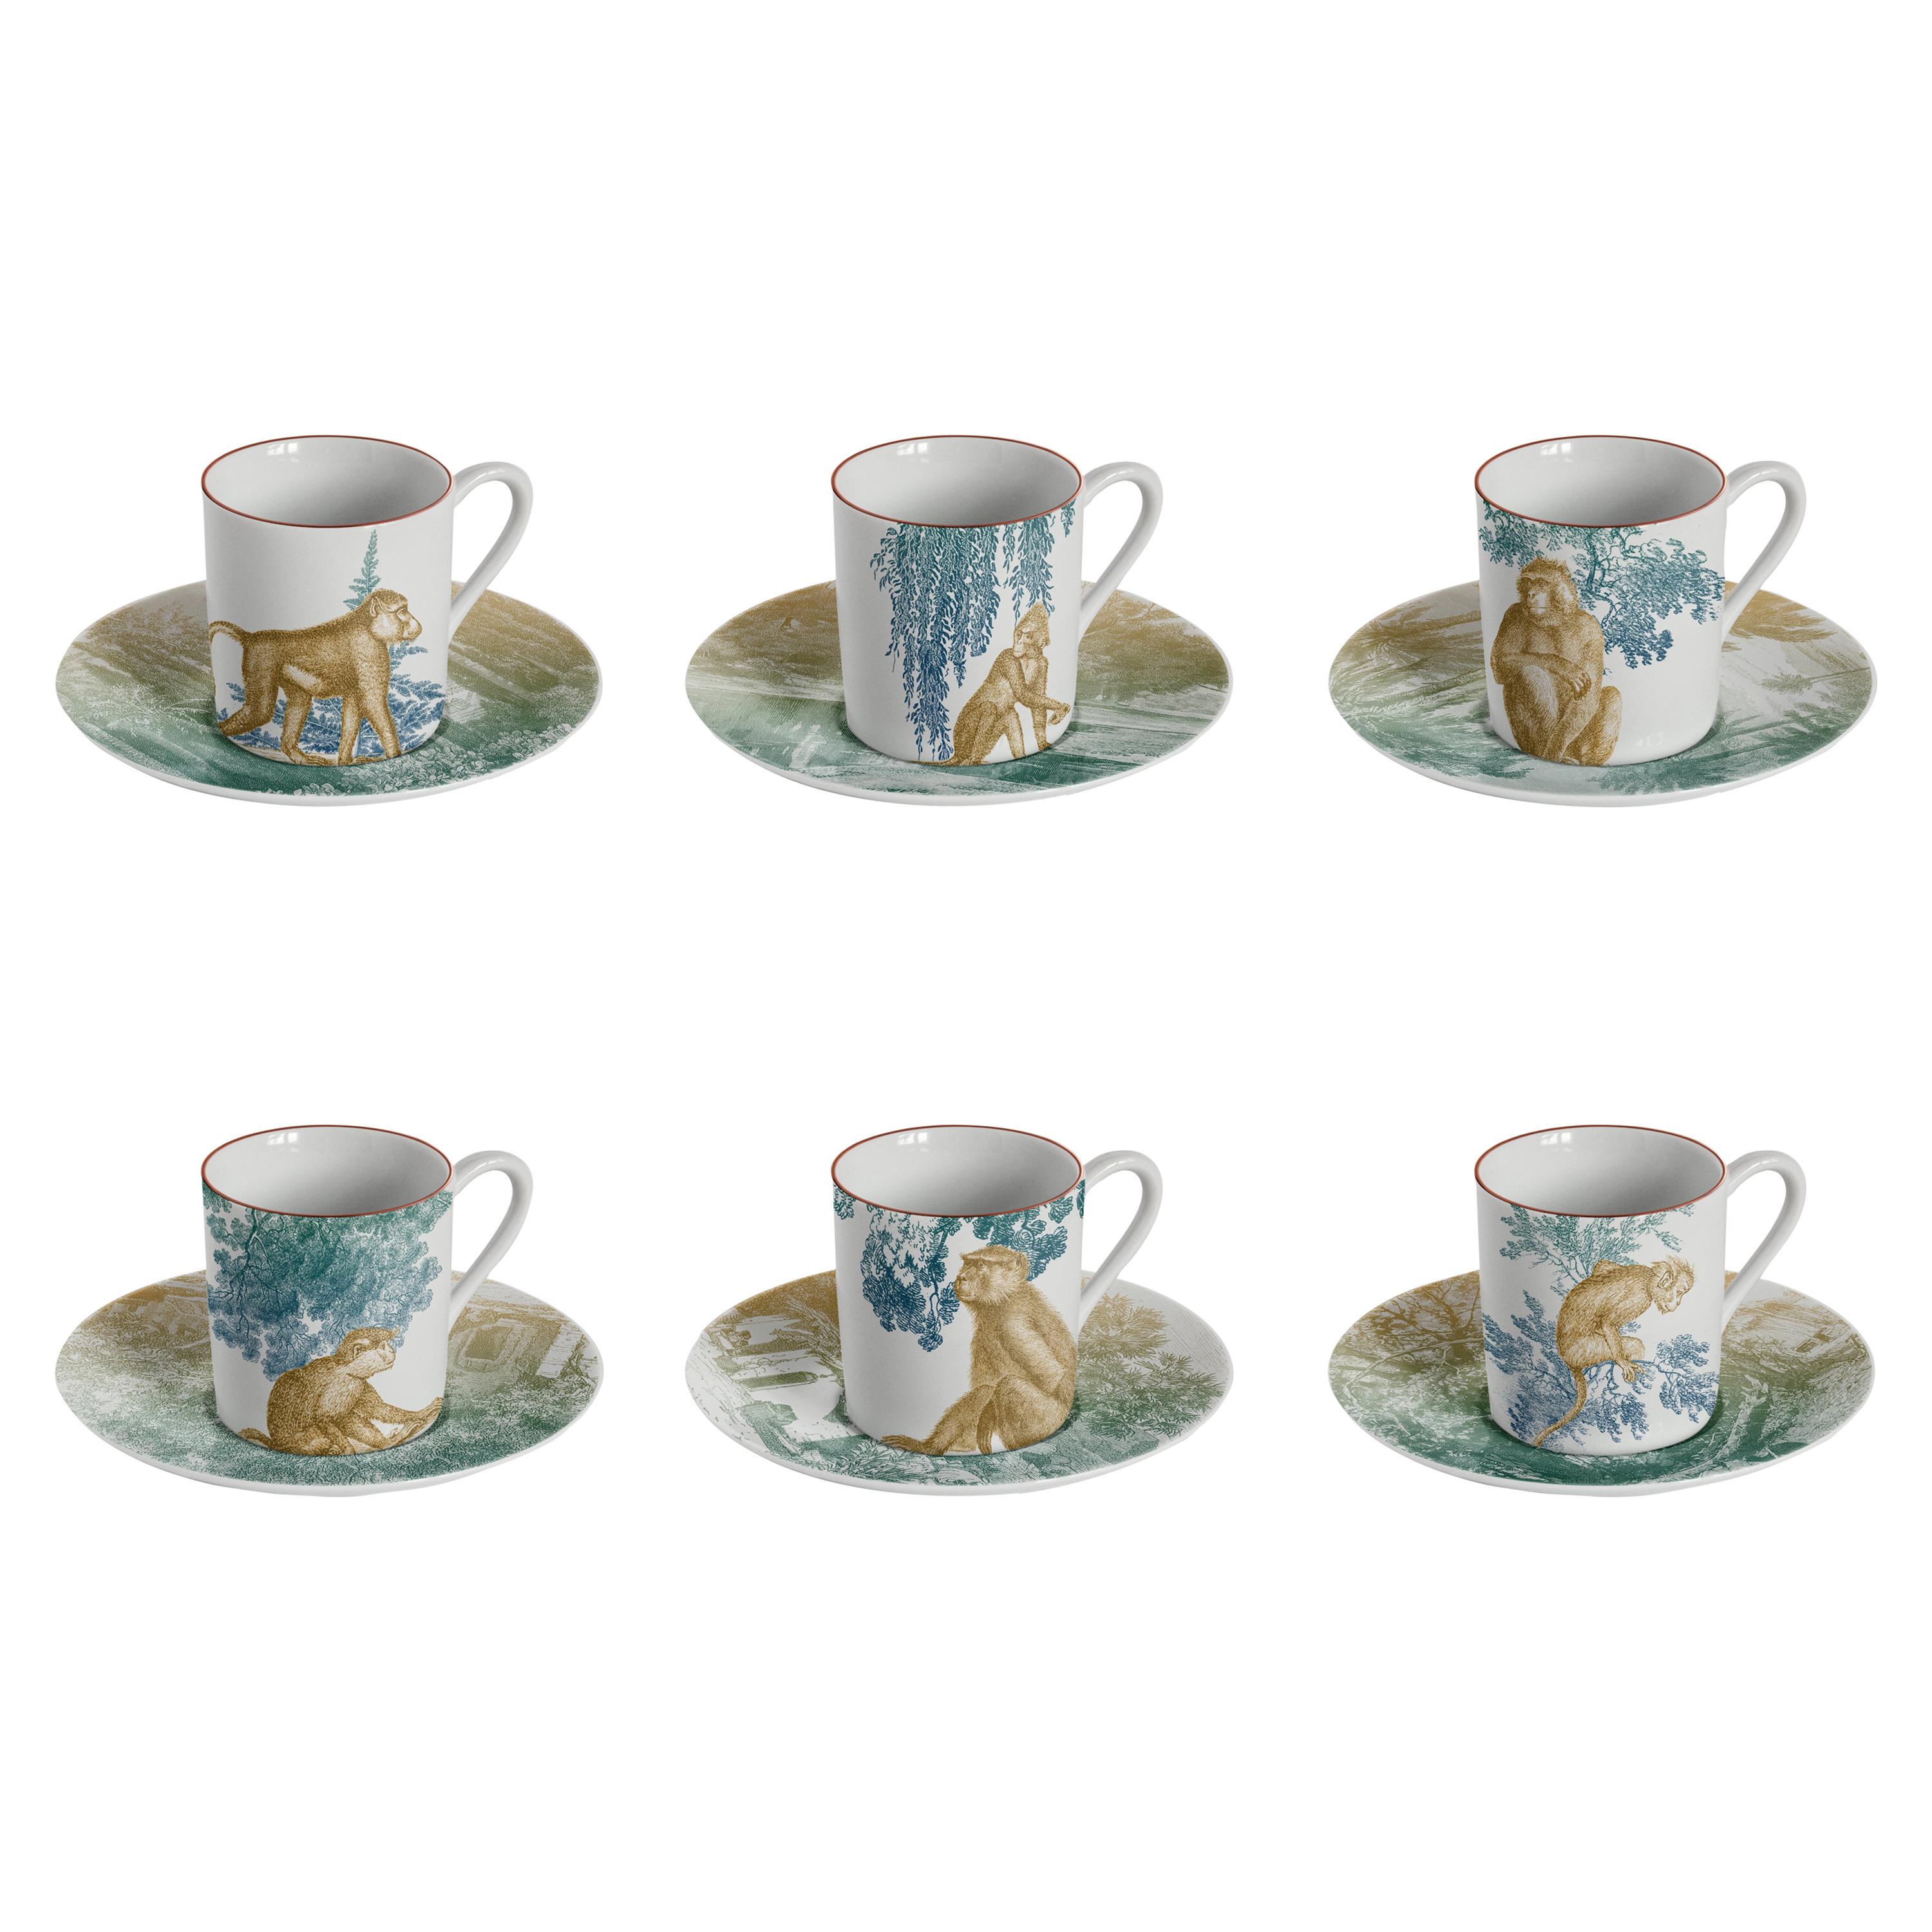 Galtaji, Coffee Set with Six Contemporary Porcelains with Decorative Design